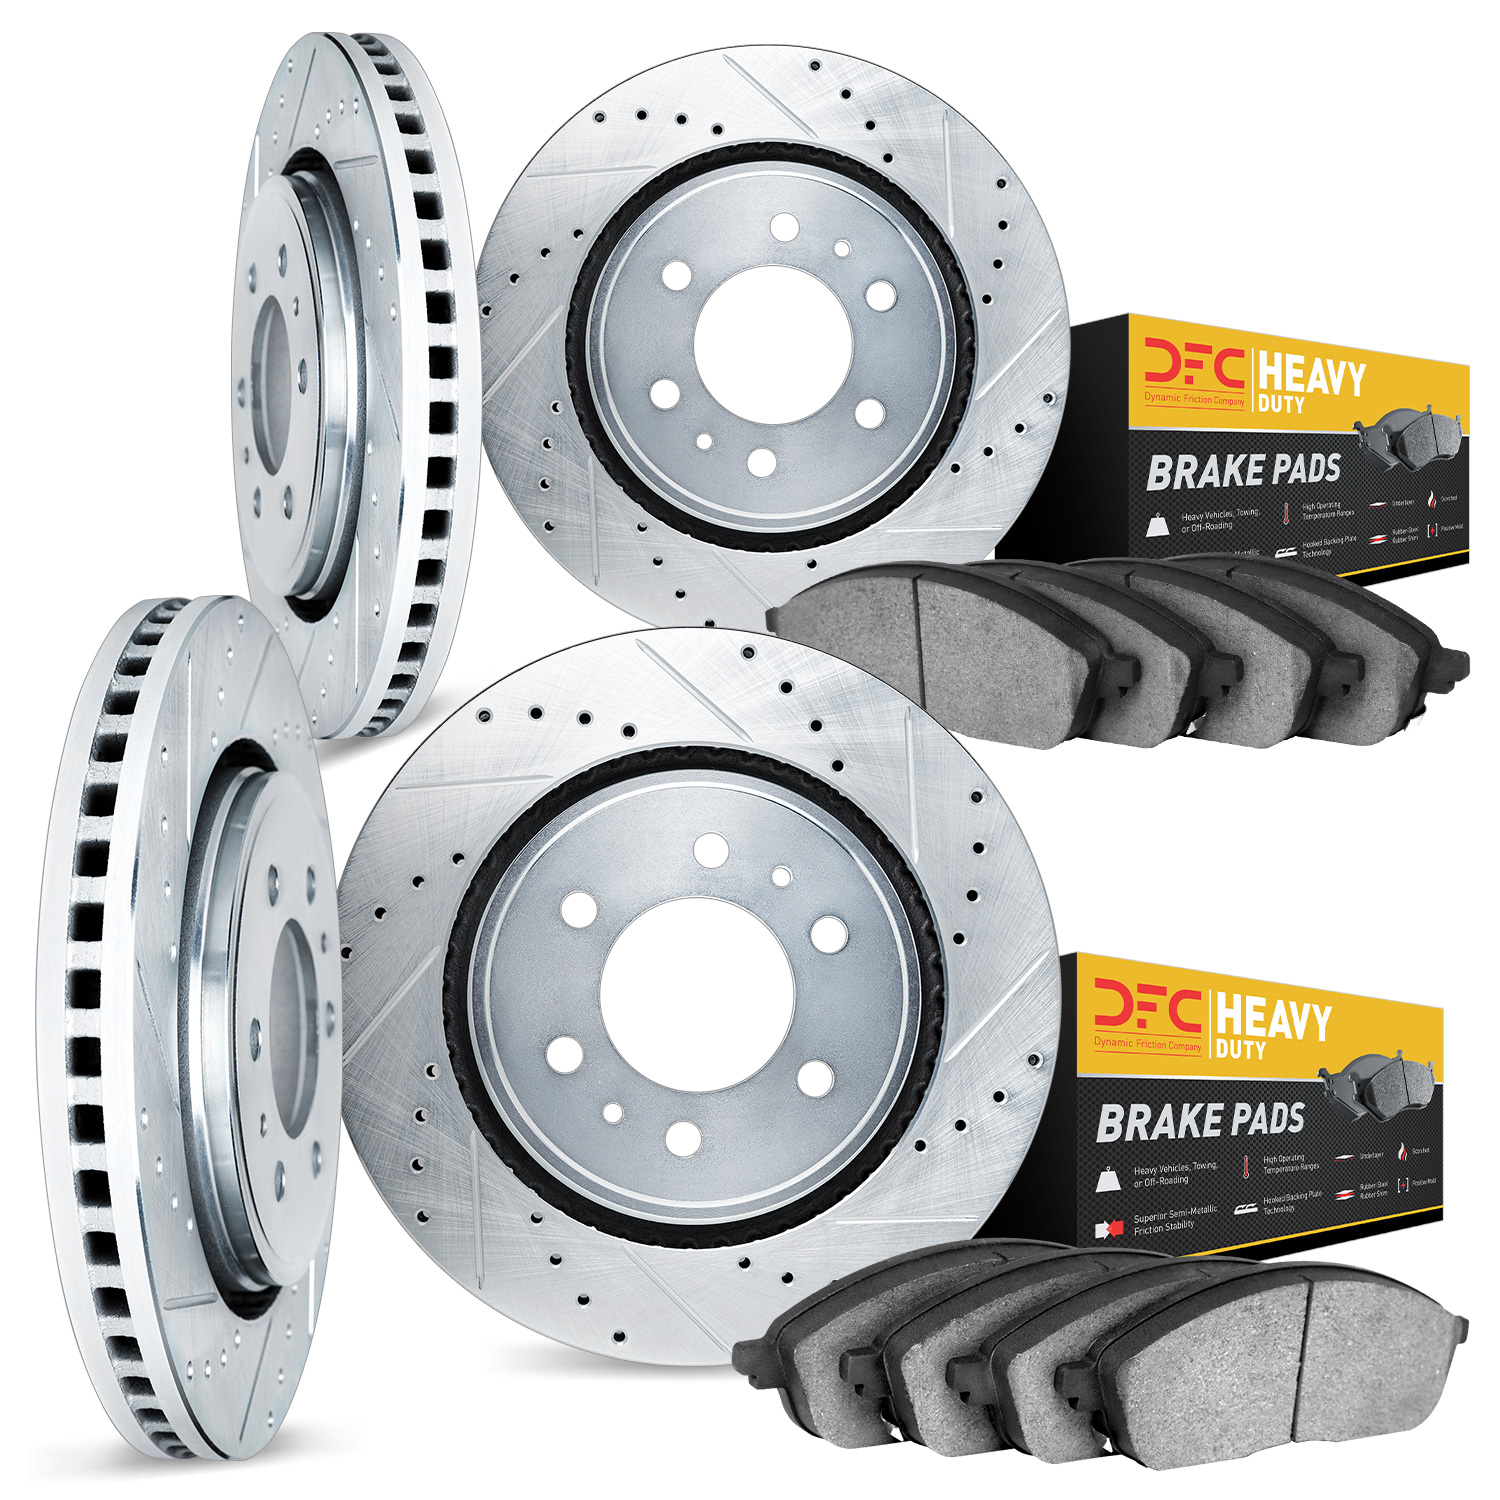 7204-99077 Drilled/Slotted Rotors w/Heavy-Duty Brake Pads Kit [Silver], 2004-2008 Ford/Lincoln/Mercury/Mazda, Position: Front an